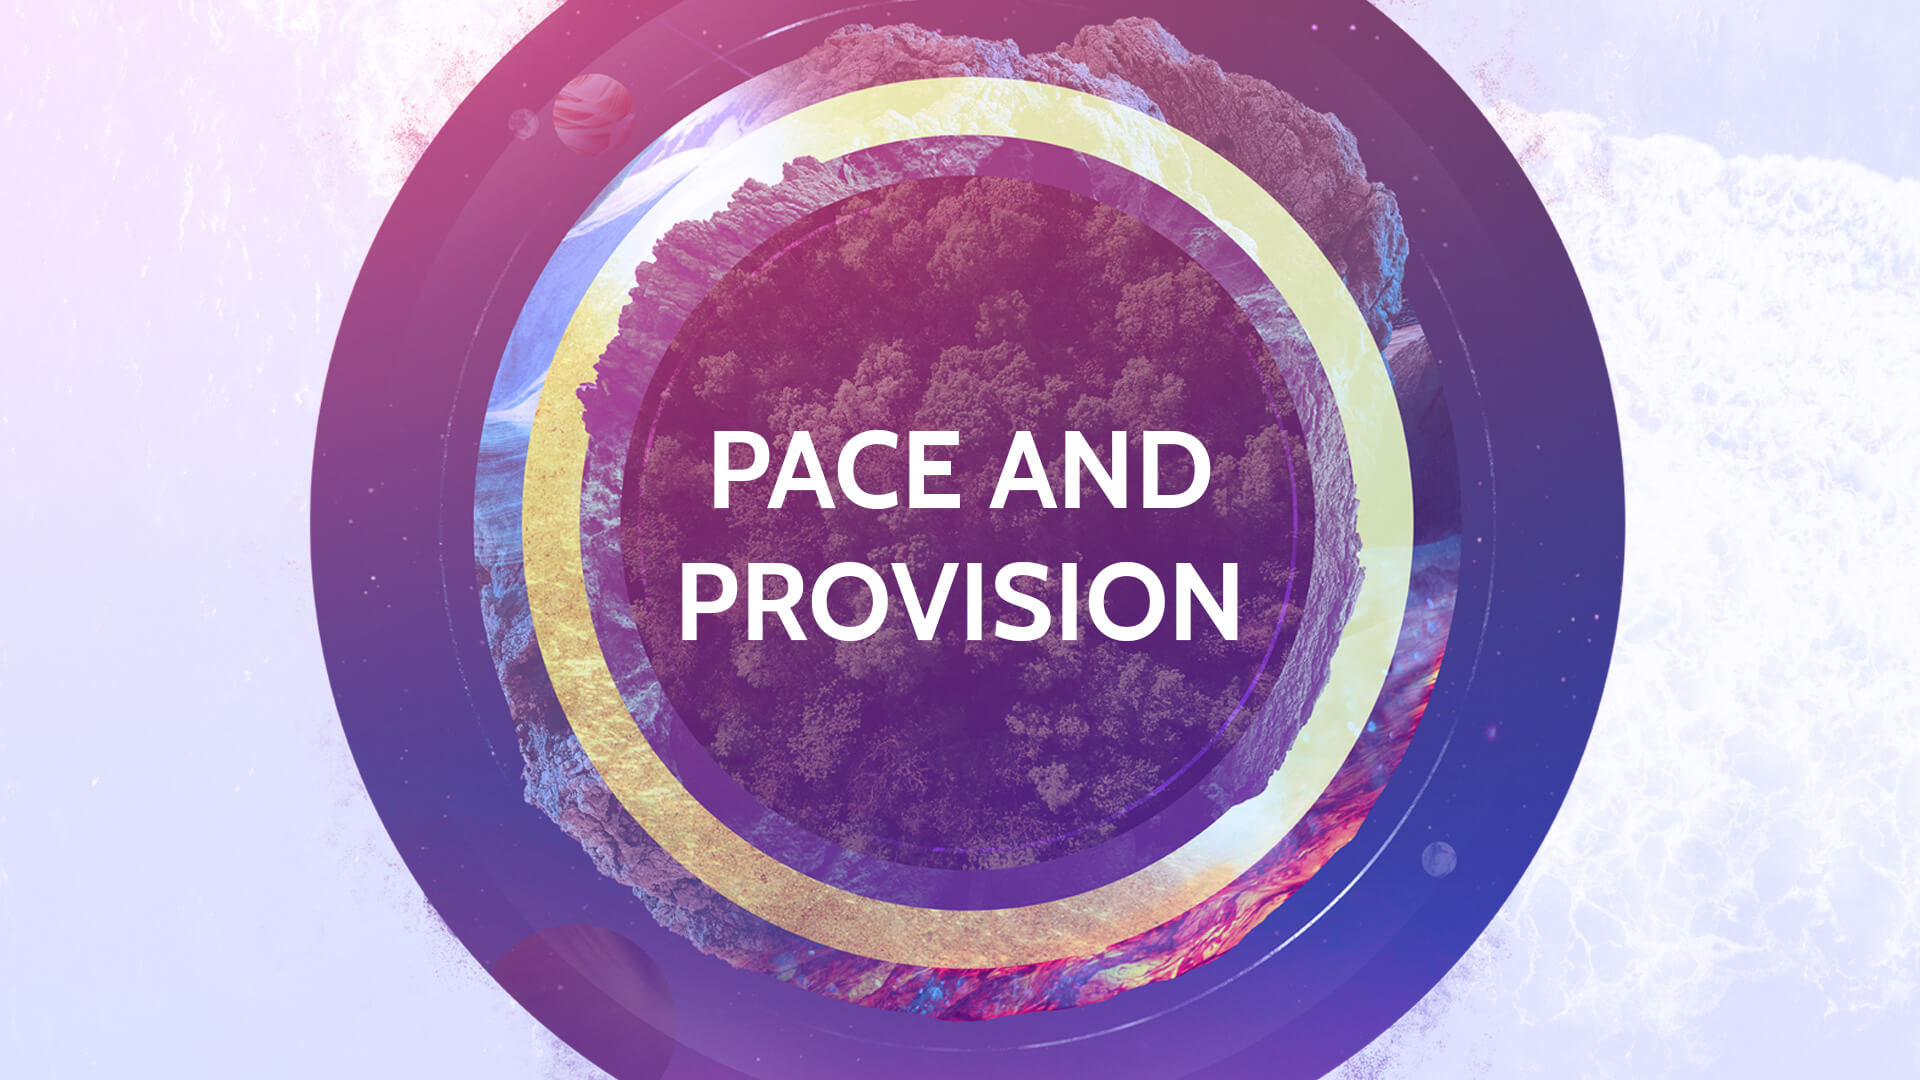 Pace and Provision